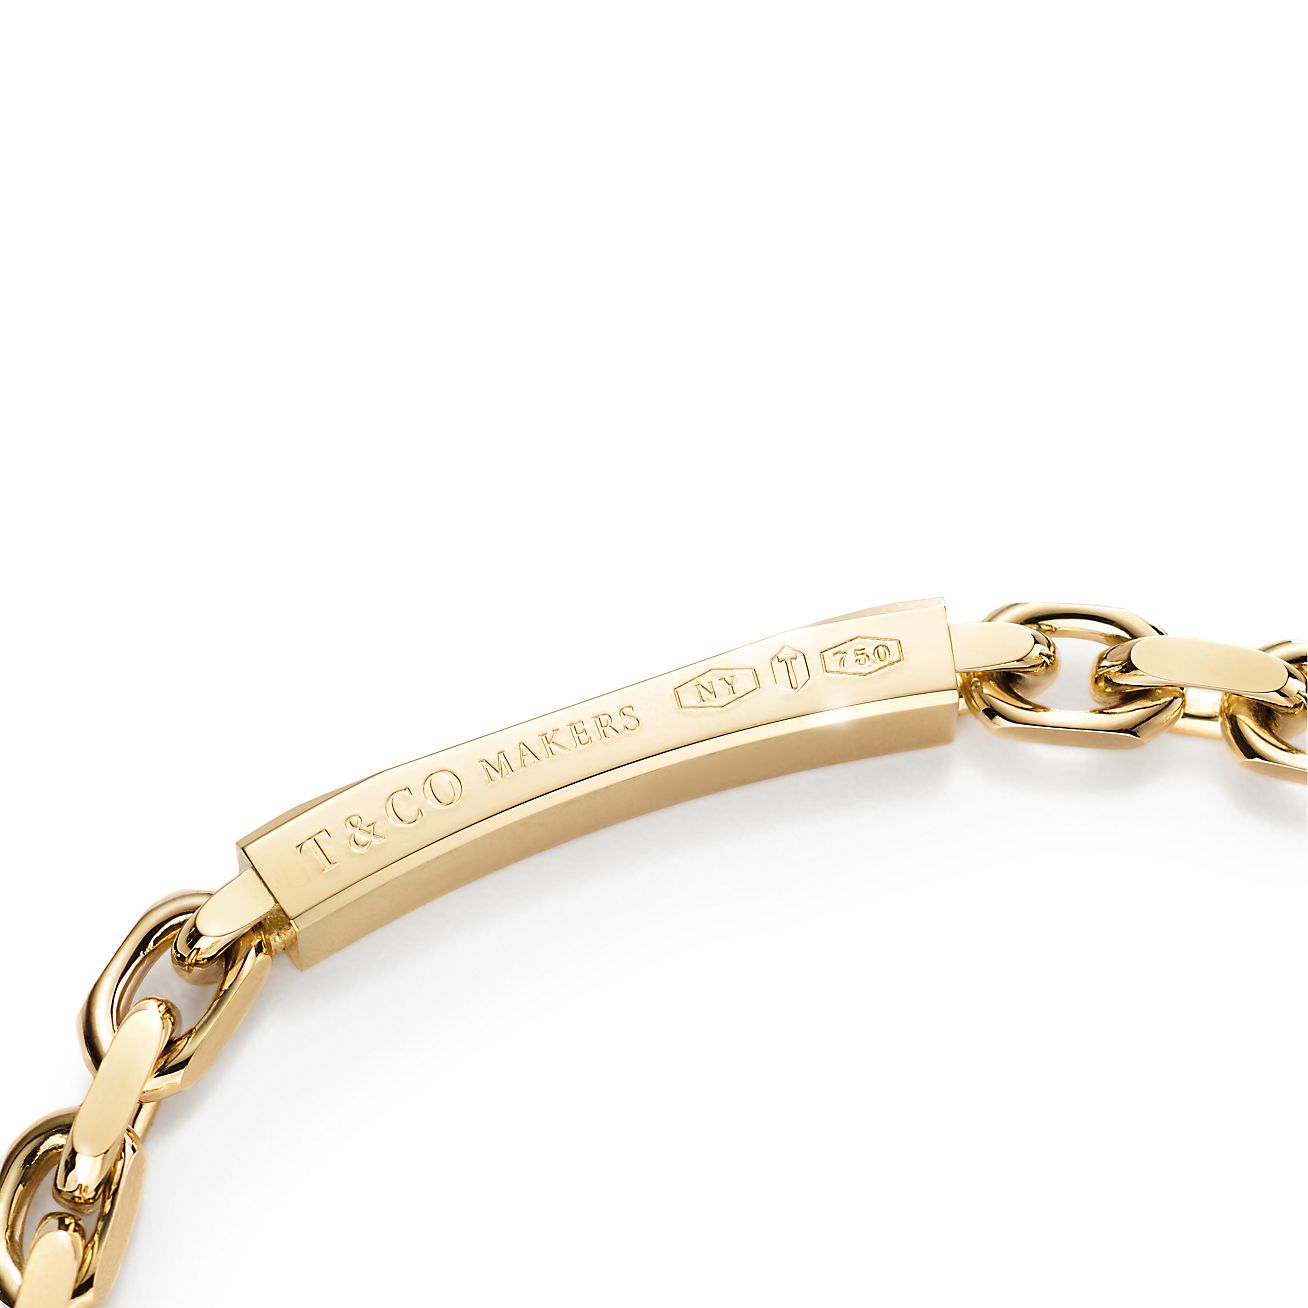 Tiffany 1837 Makers ID Chain Bracelet in 18K Gold, Small